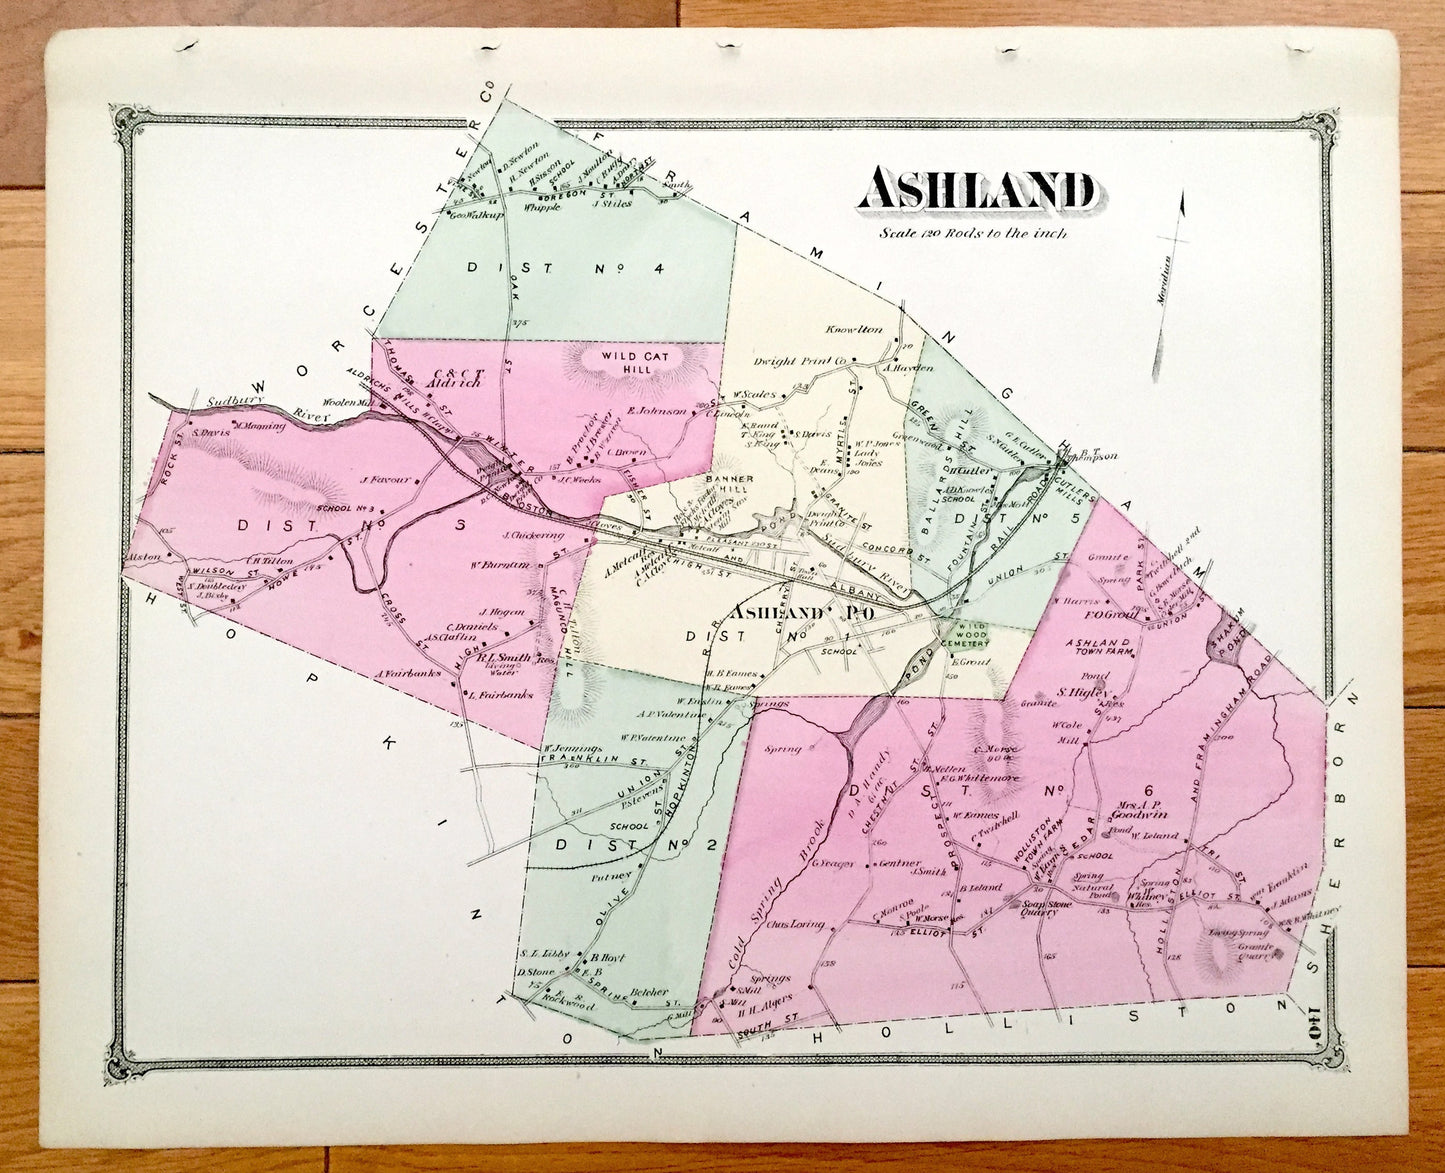 Antique 1875 Ashland, Massachusetts Map from J.B. Beers Atlas of Middlesex County – Sudbury River, Wild Cat Hill, Cold Spring Brook, Shakum